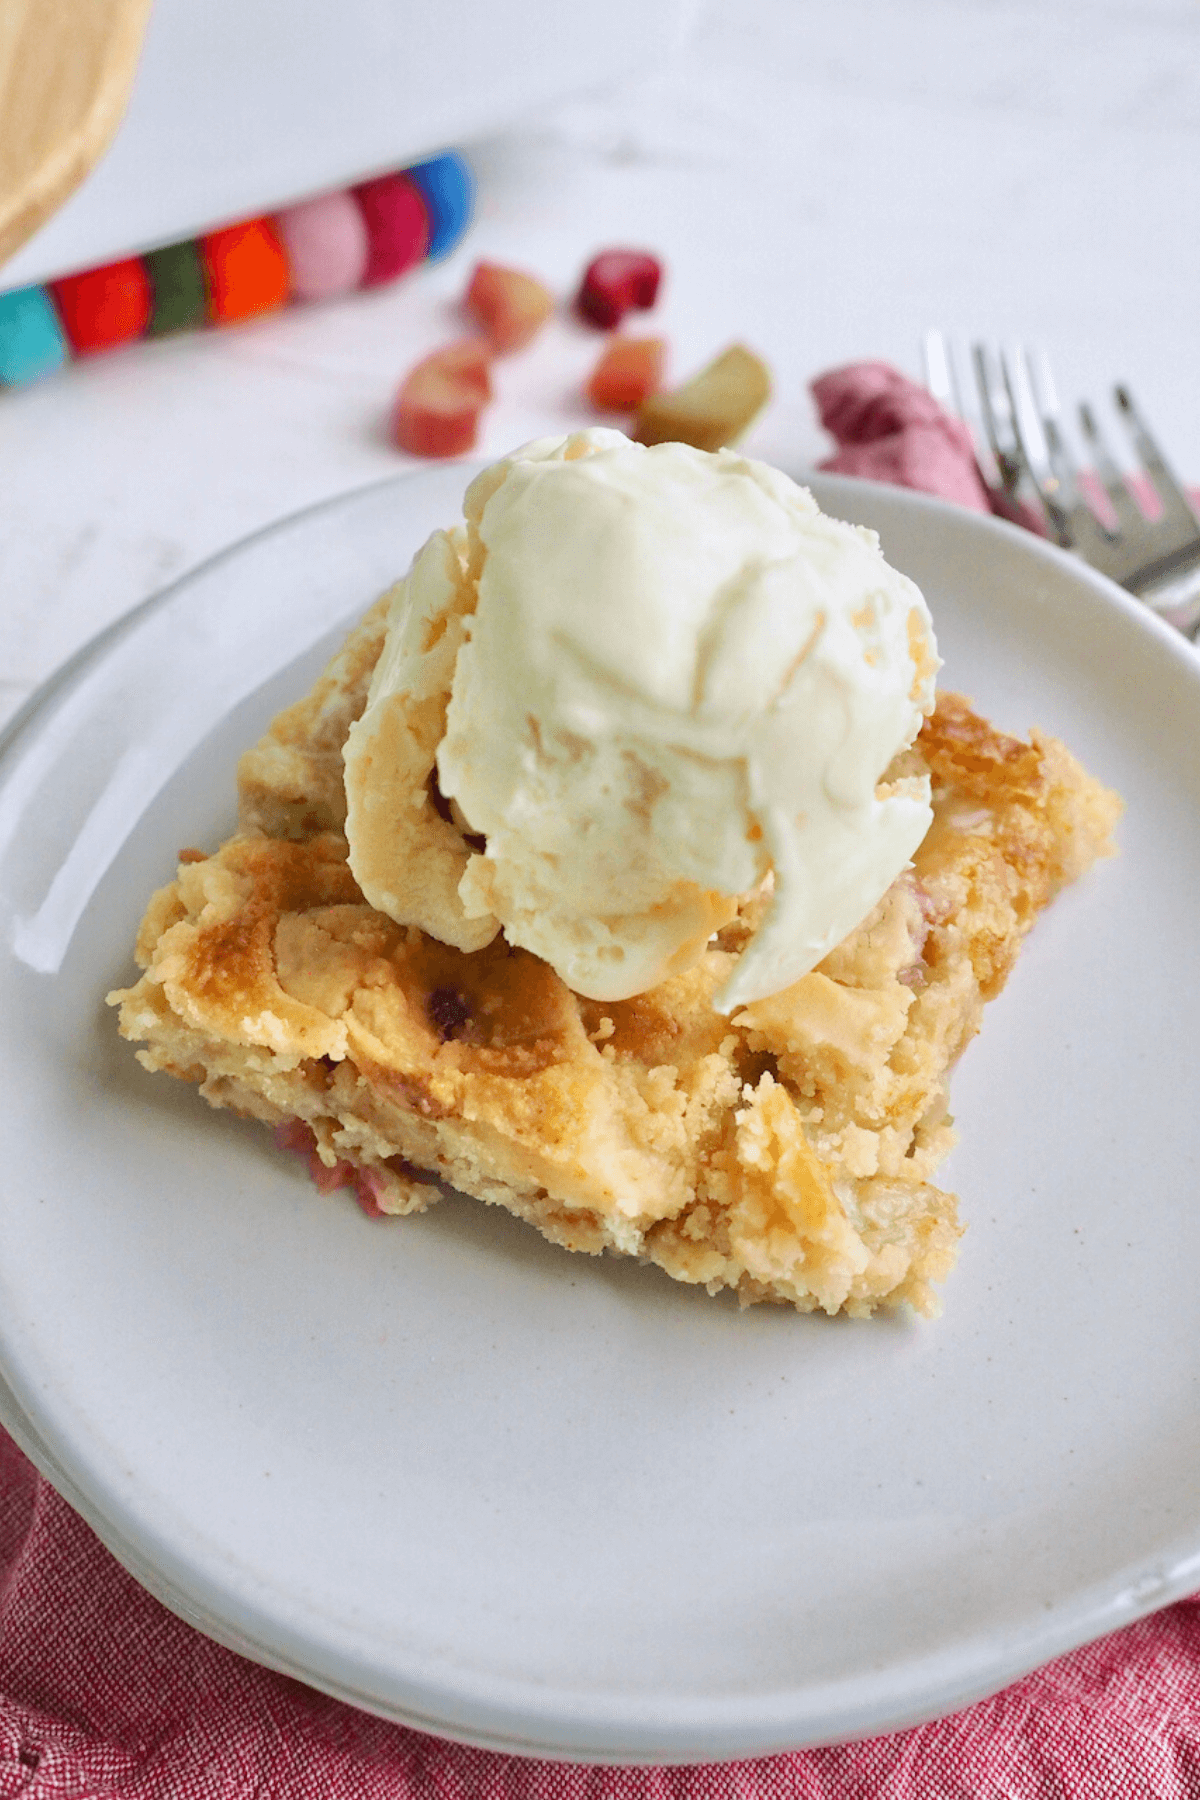 Slice of rhubarb dump cake on a plate with a scoop of vanilla ice cream, forks in background along with pieces of rhubarb.